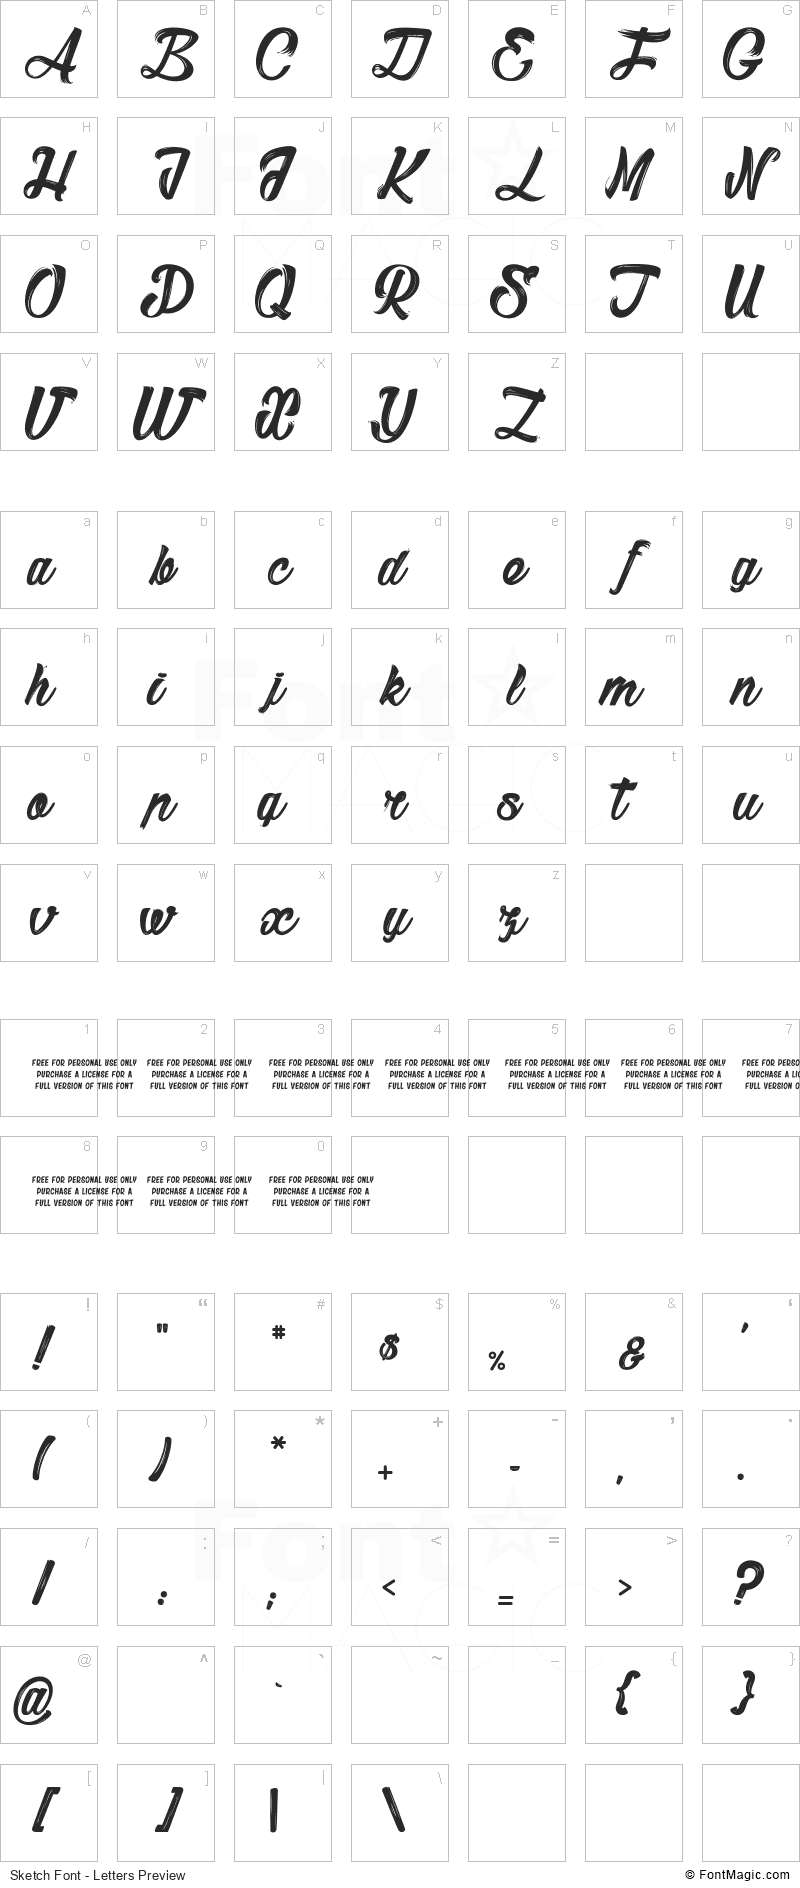 Sketch Font - All Latters Preview Chart